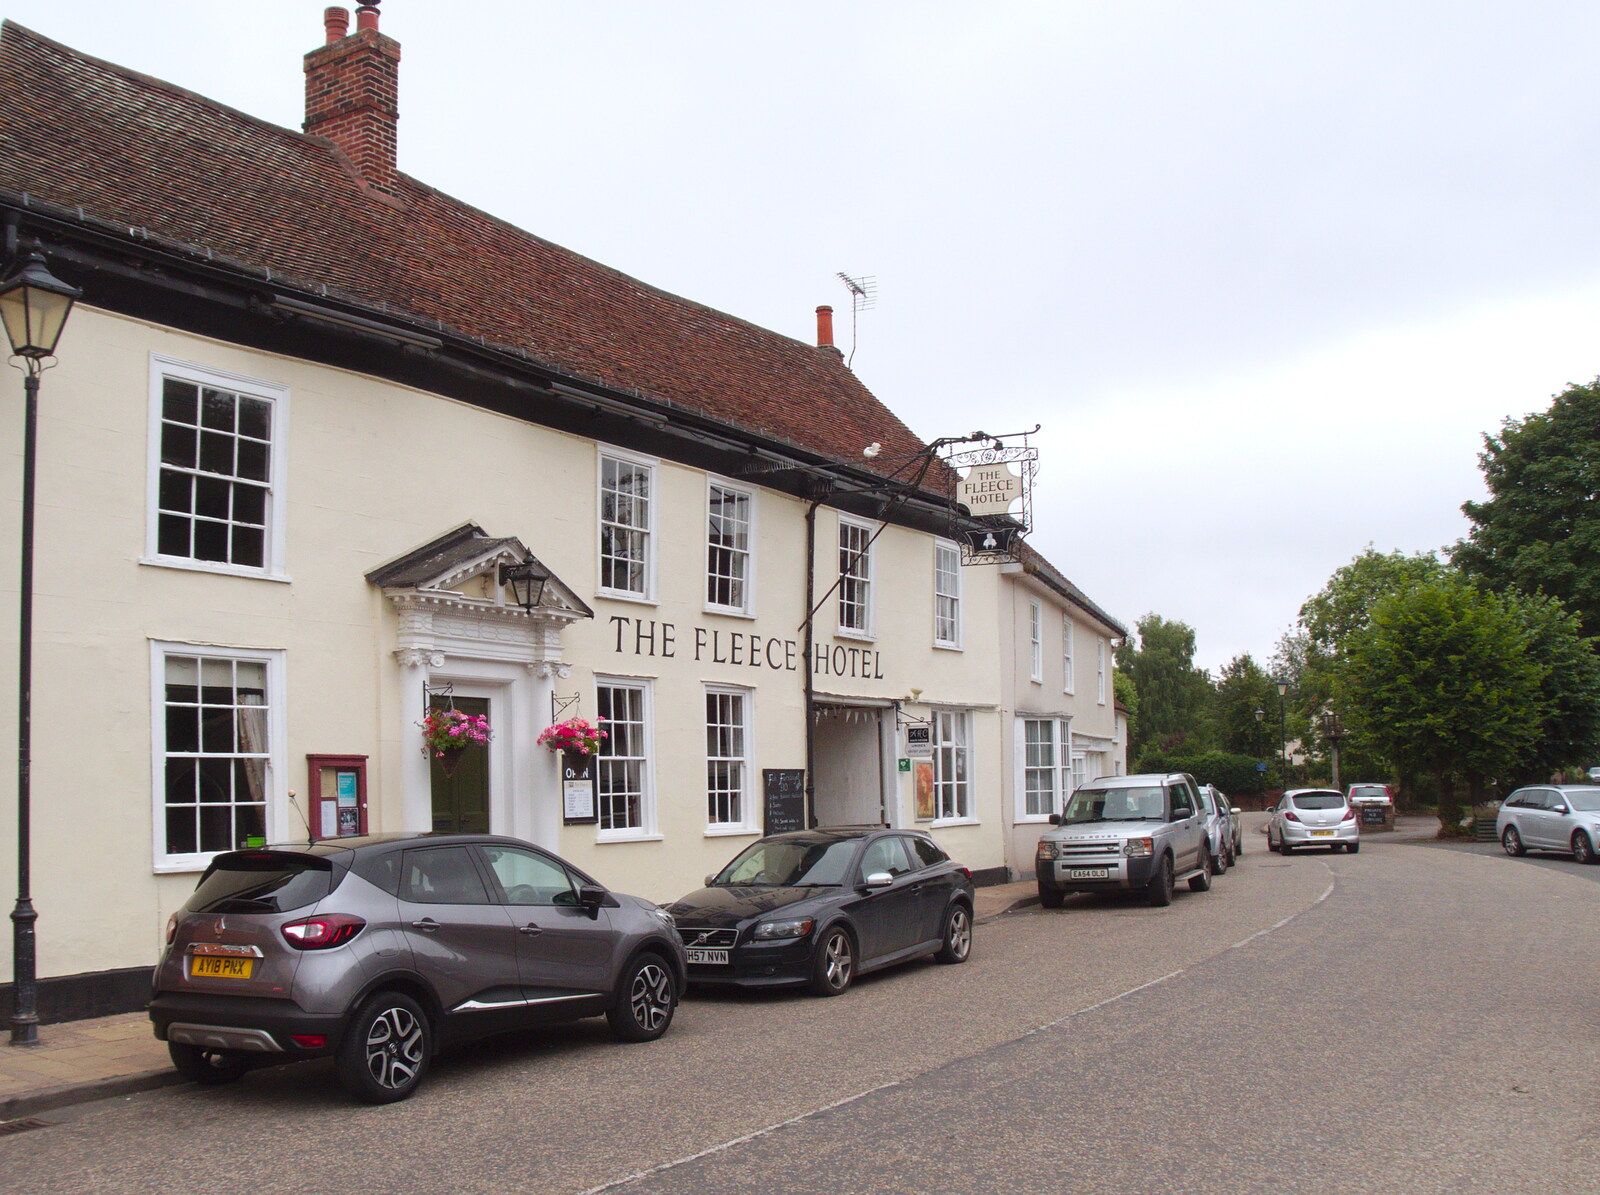 A Postcard from Boxford and BSCC at Pulham, Suffolk and Norfolk - 13th July 2019: The Fleece Hotel in Boxford